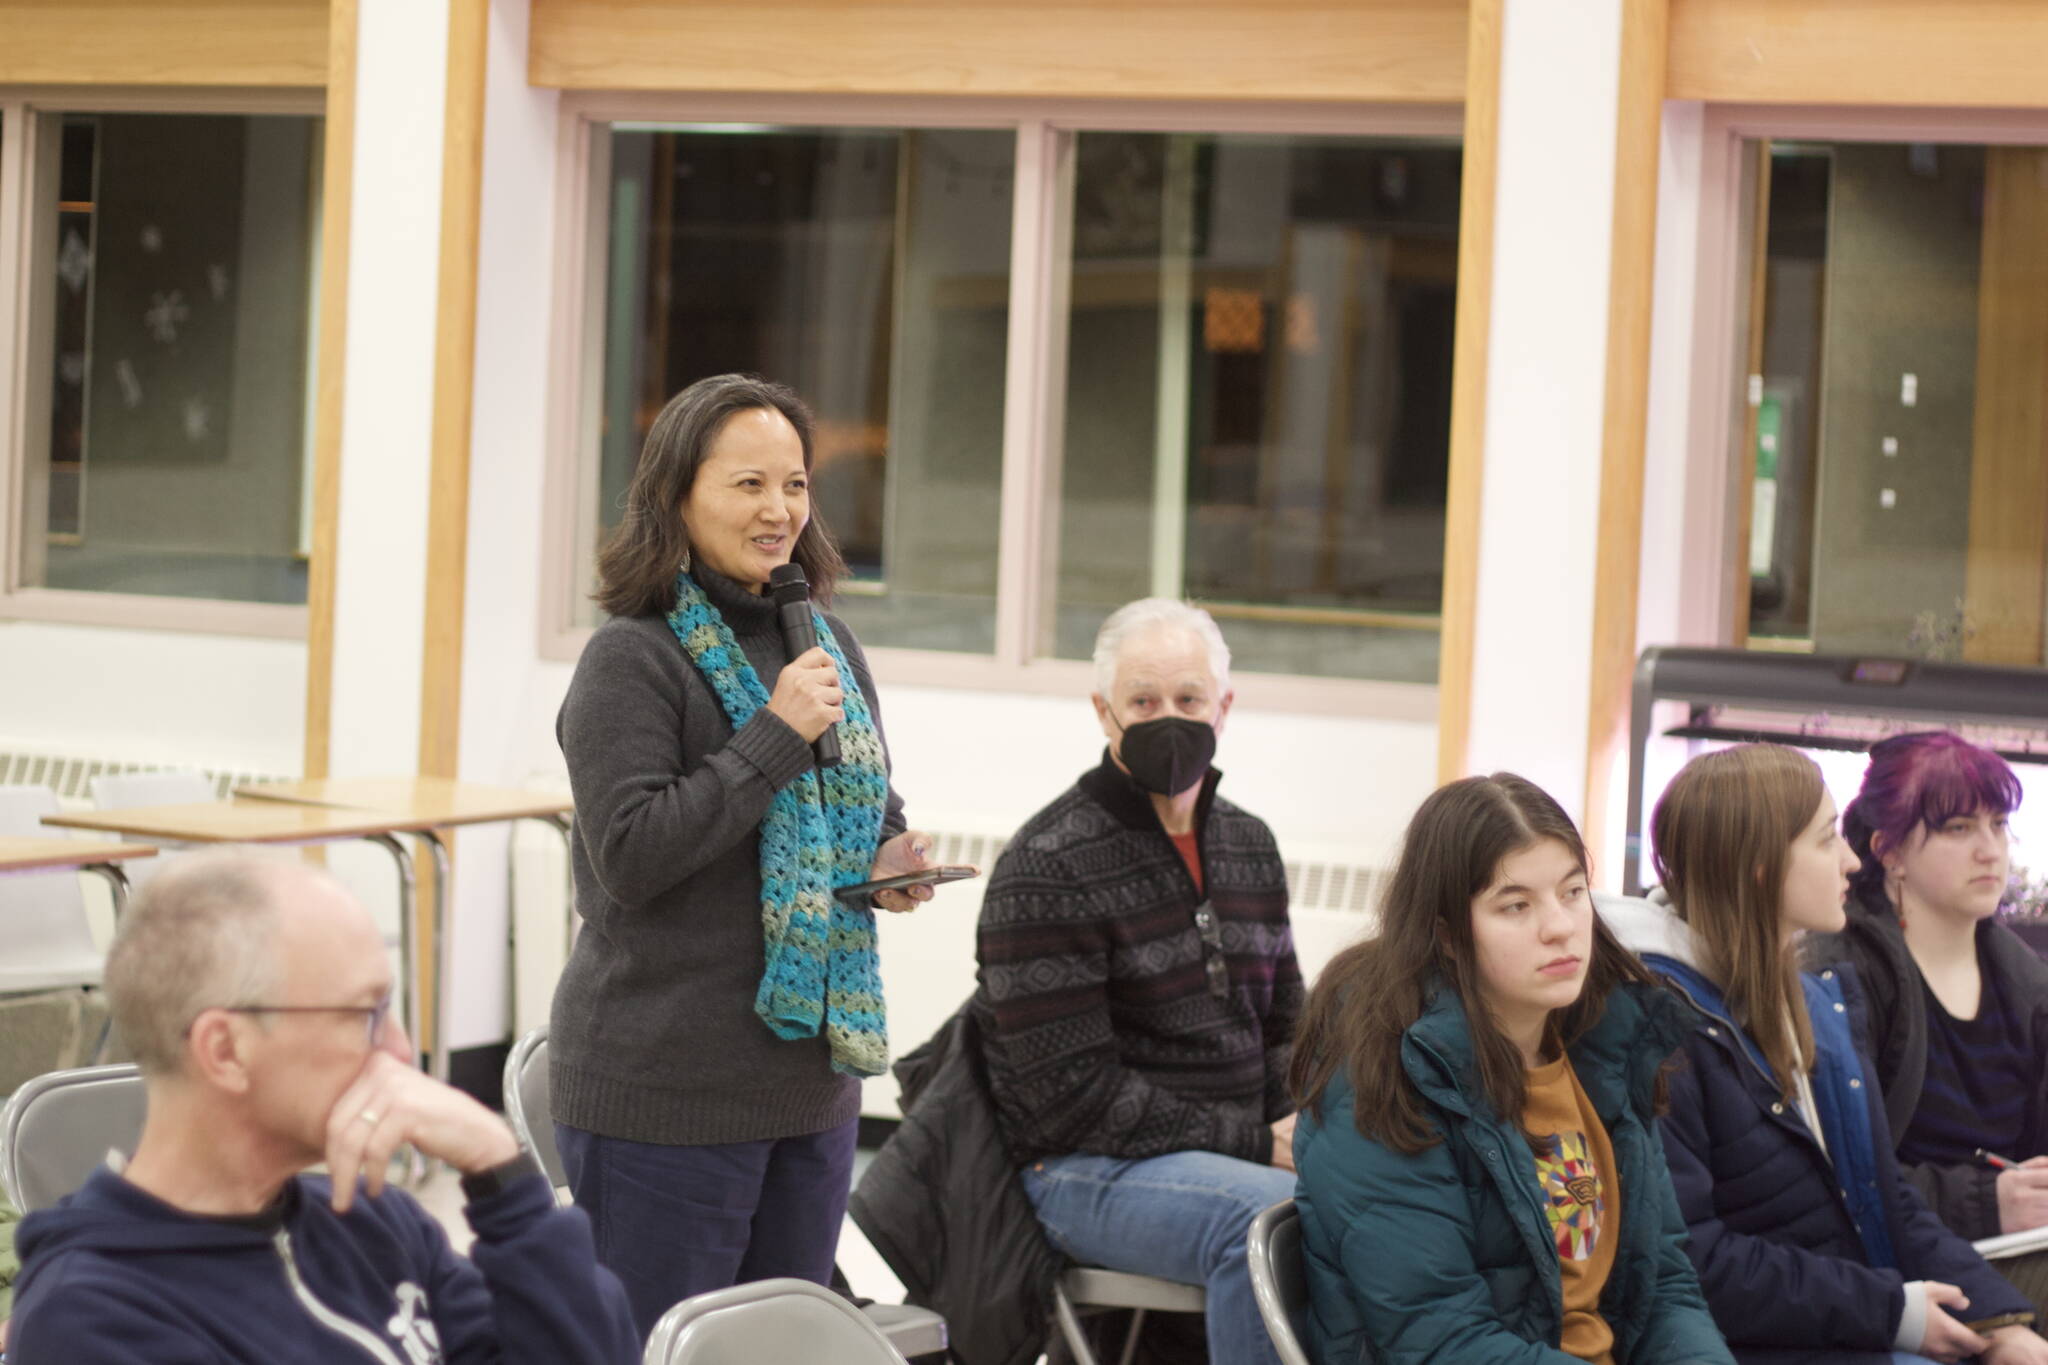 Lisa X’unyéil Worl, a longtime advocate for education and other issues, asks Juneau’s legislative delegation about the prospects for public broadcasting funding from the state during a town hall meeting Wednesday evening at Dzantik’i Heeni Middle School. (Mark Sabbatini / Juneau Empire)